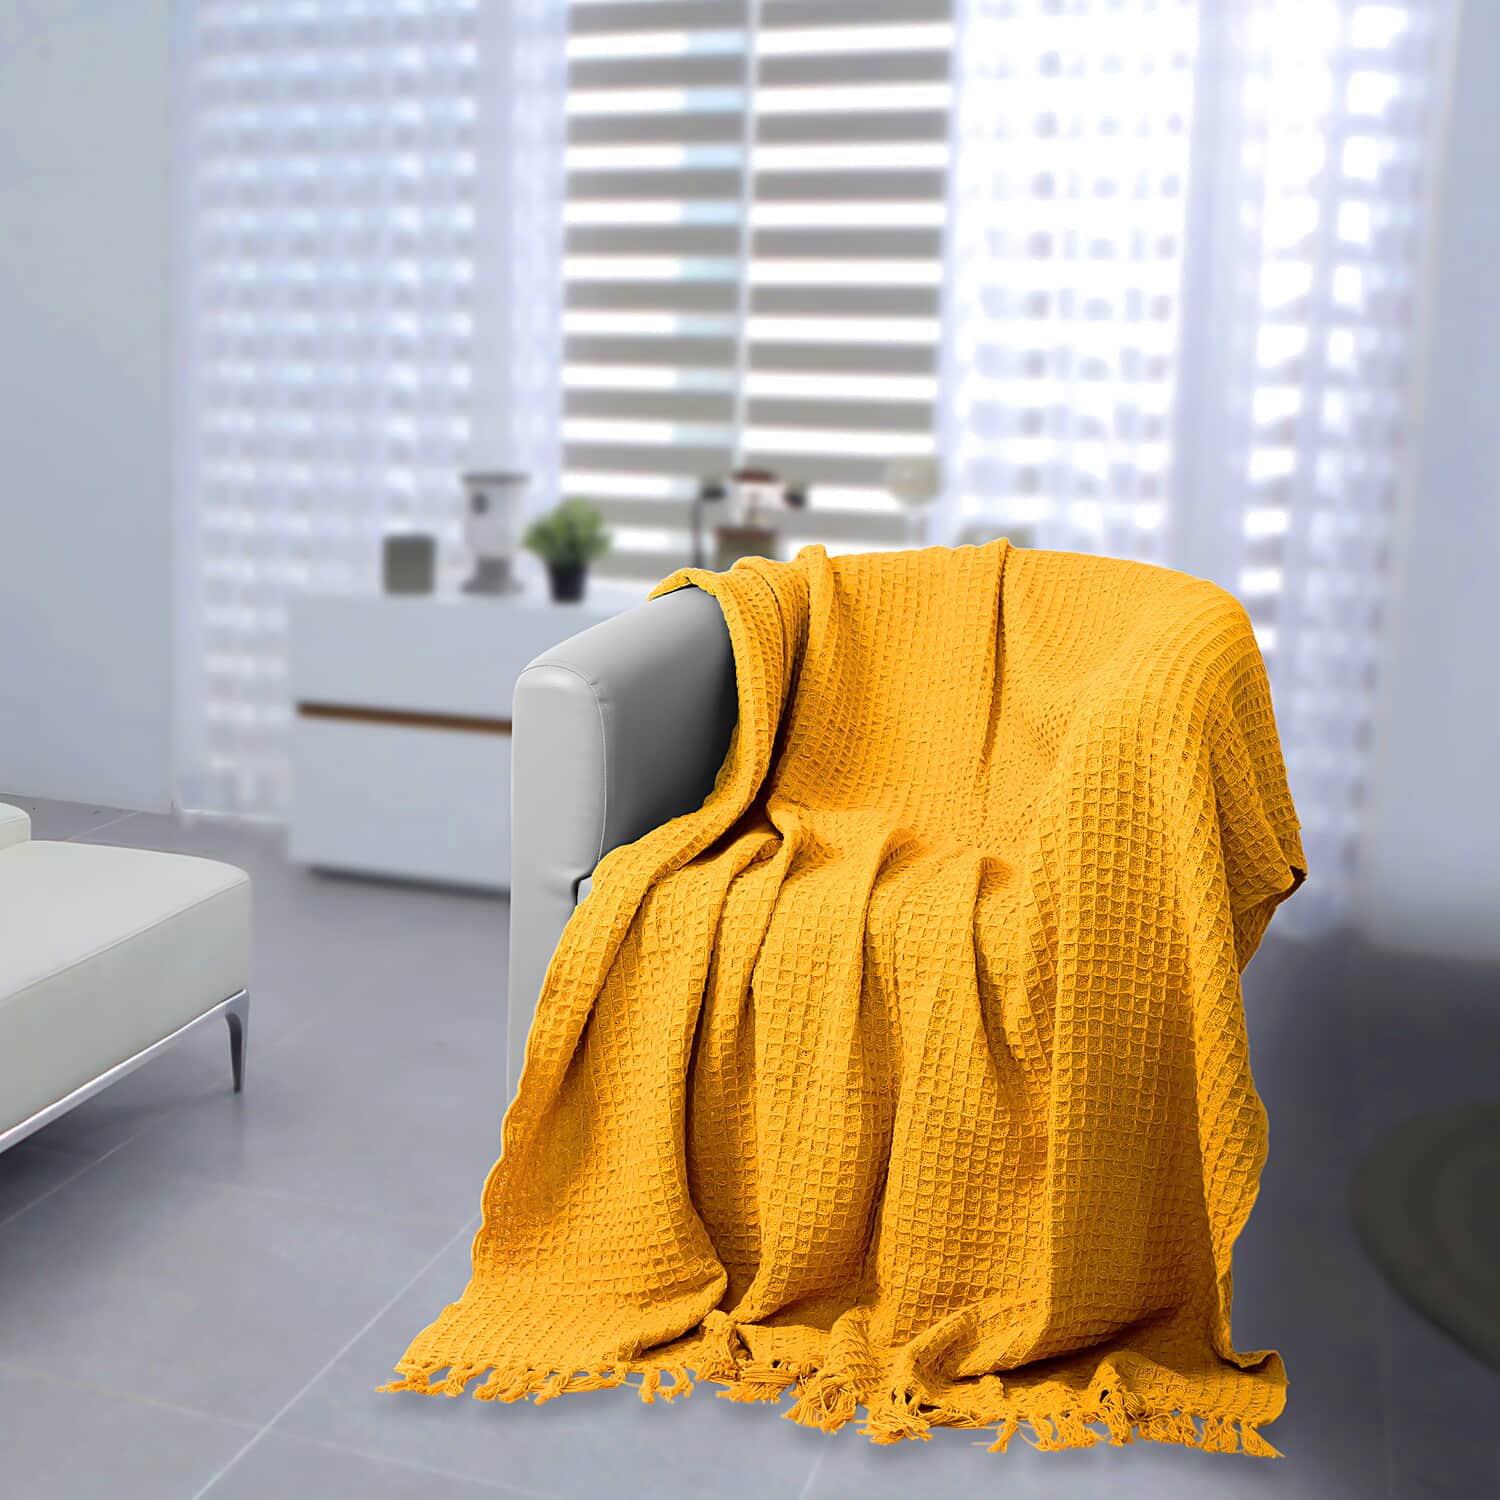 Shop LC Yellow Honeycomb Pattern Cotton Throw Super Soft with Tassels 70"X55" Birthday Gifts - image 3 of 12